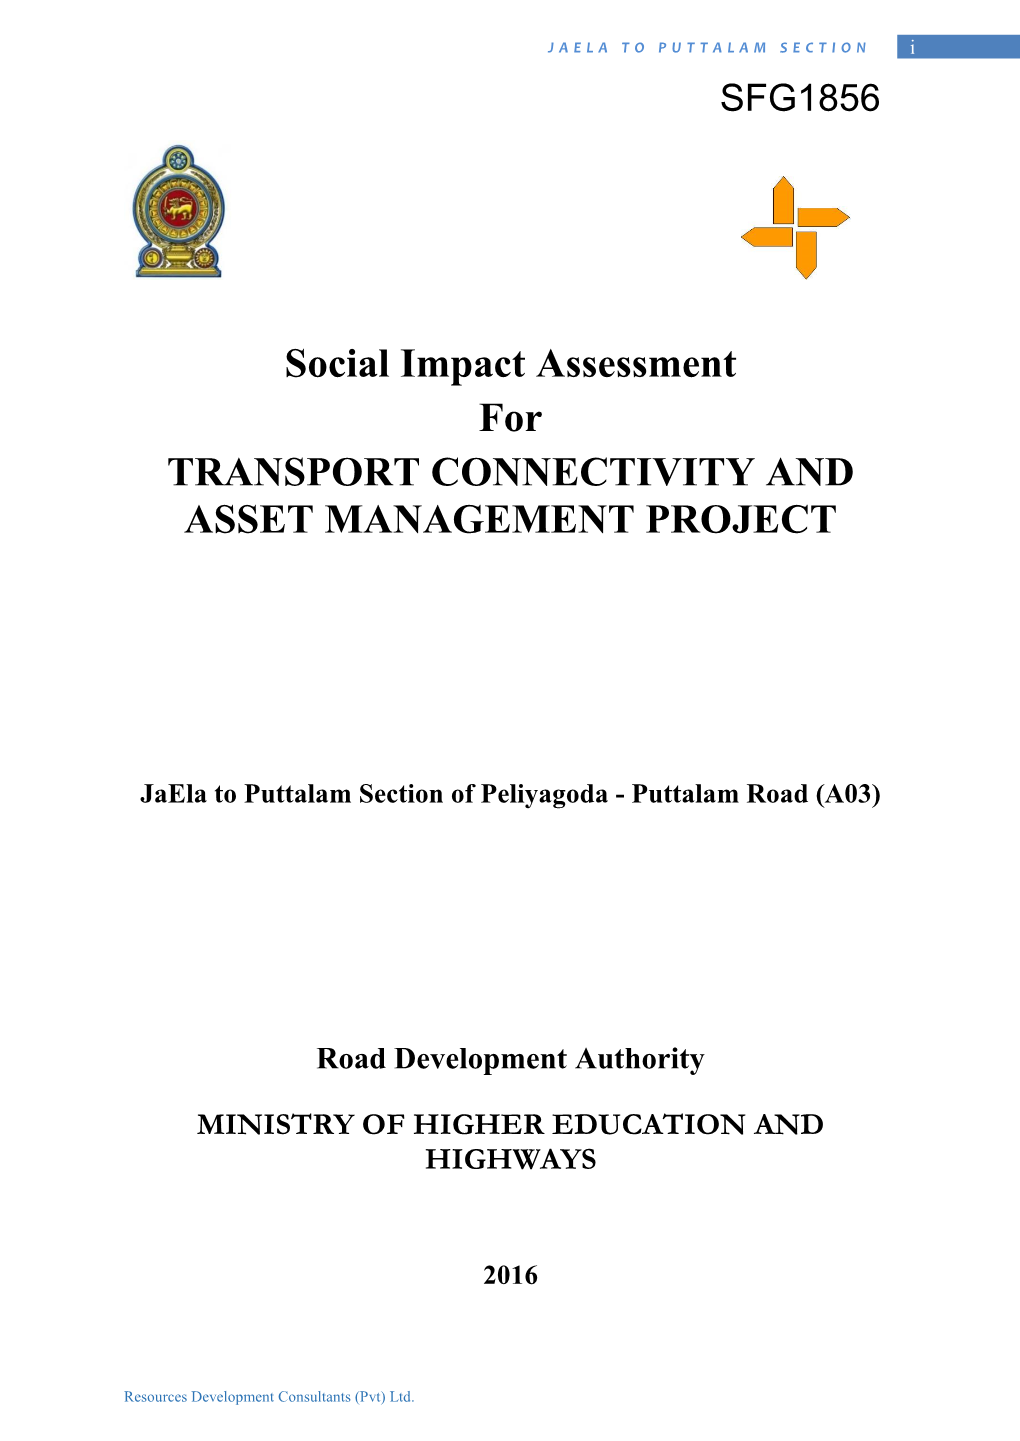 Social Impact Assessment for TRANSPORT CONNECTIVITY and ASSET MANAGEMENT PROJECT